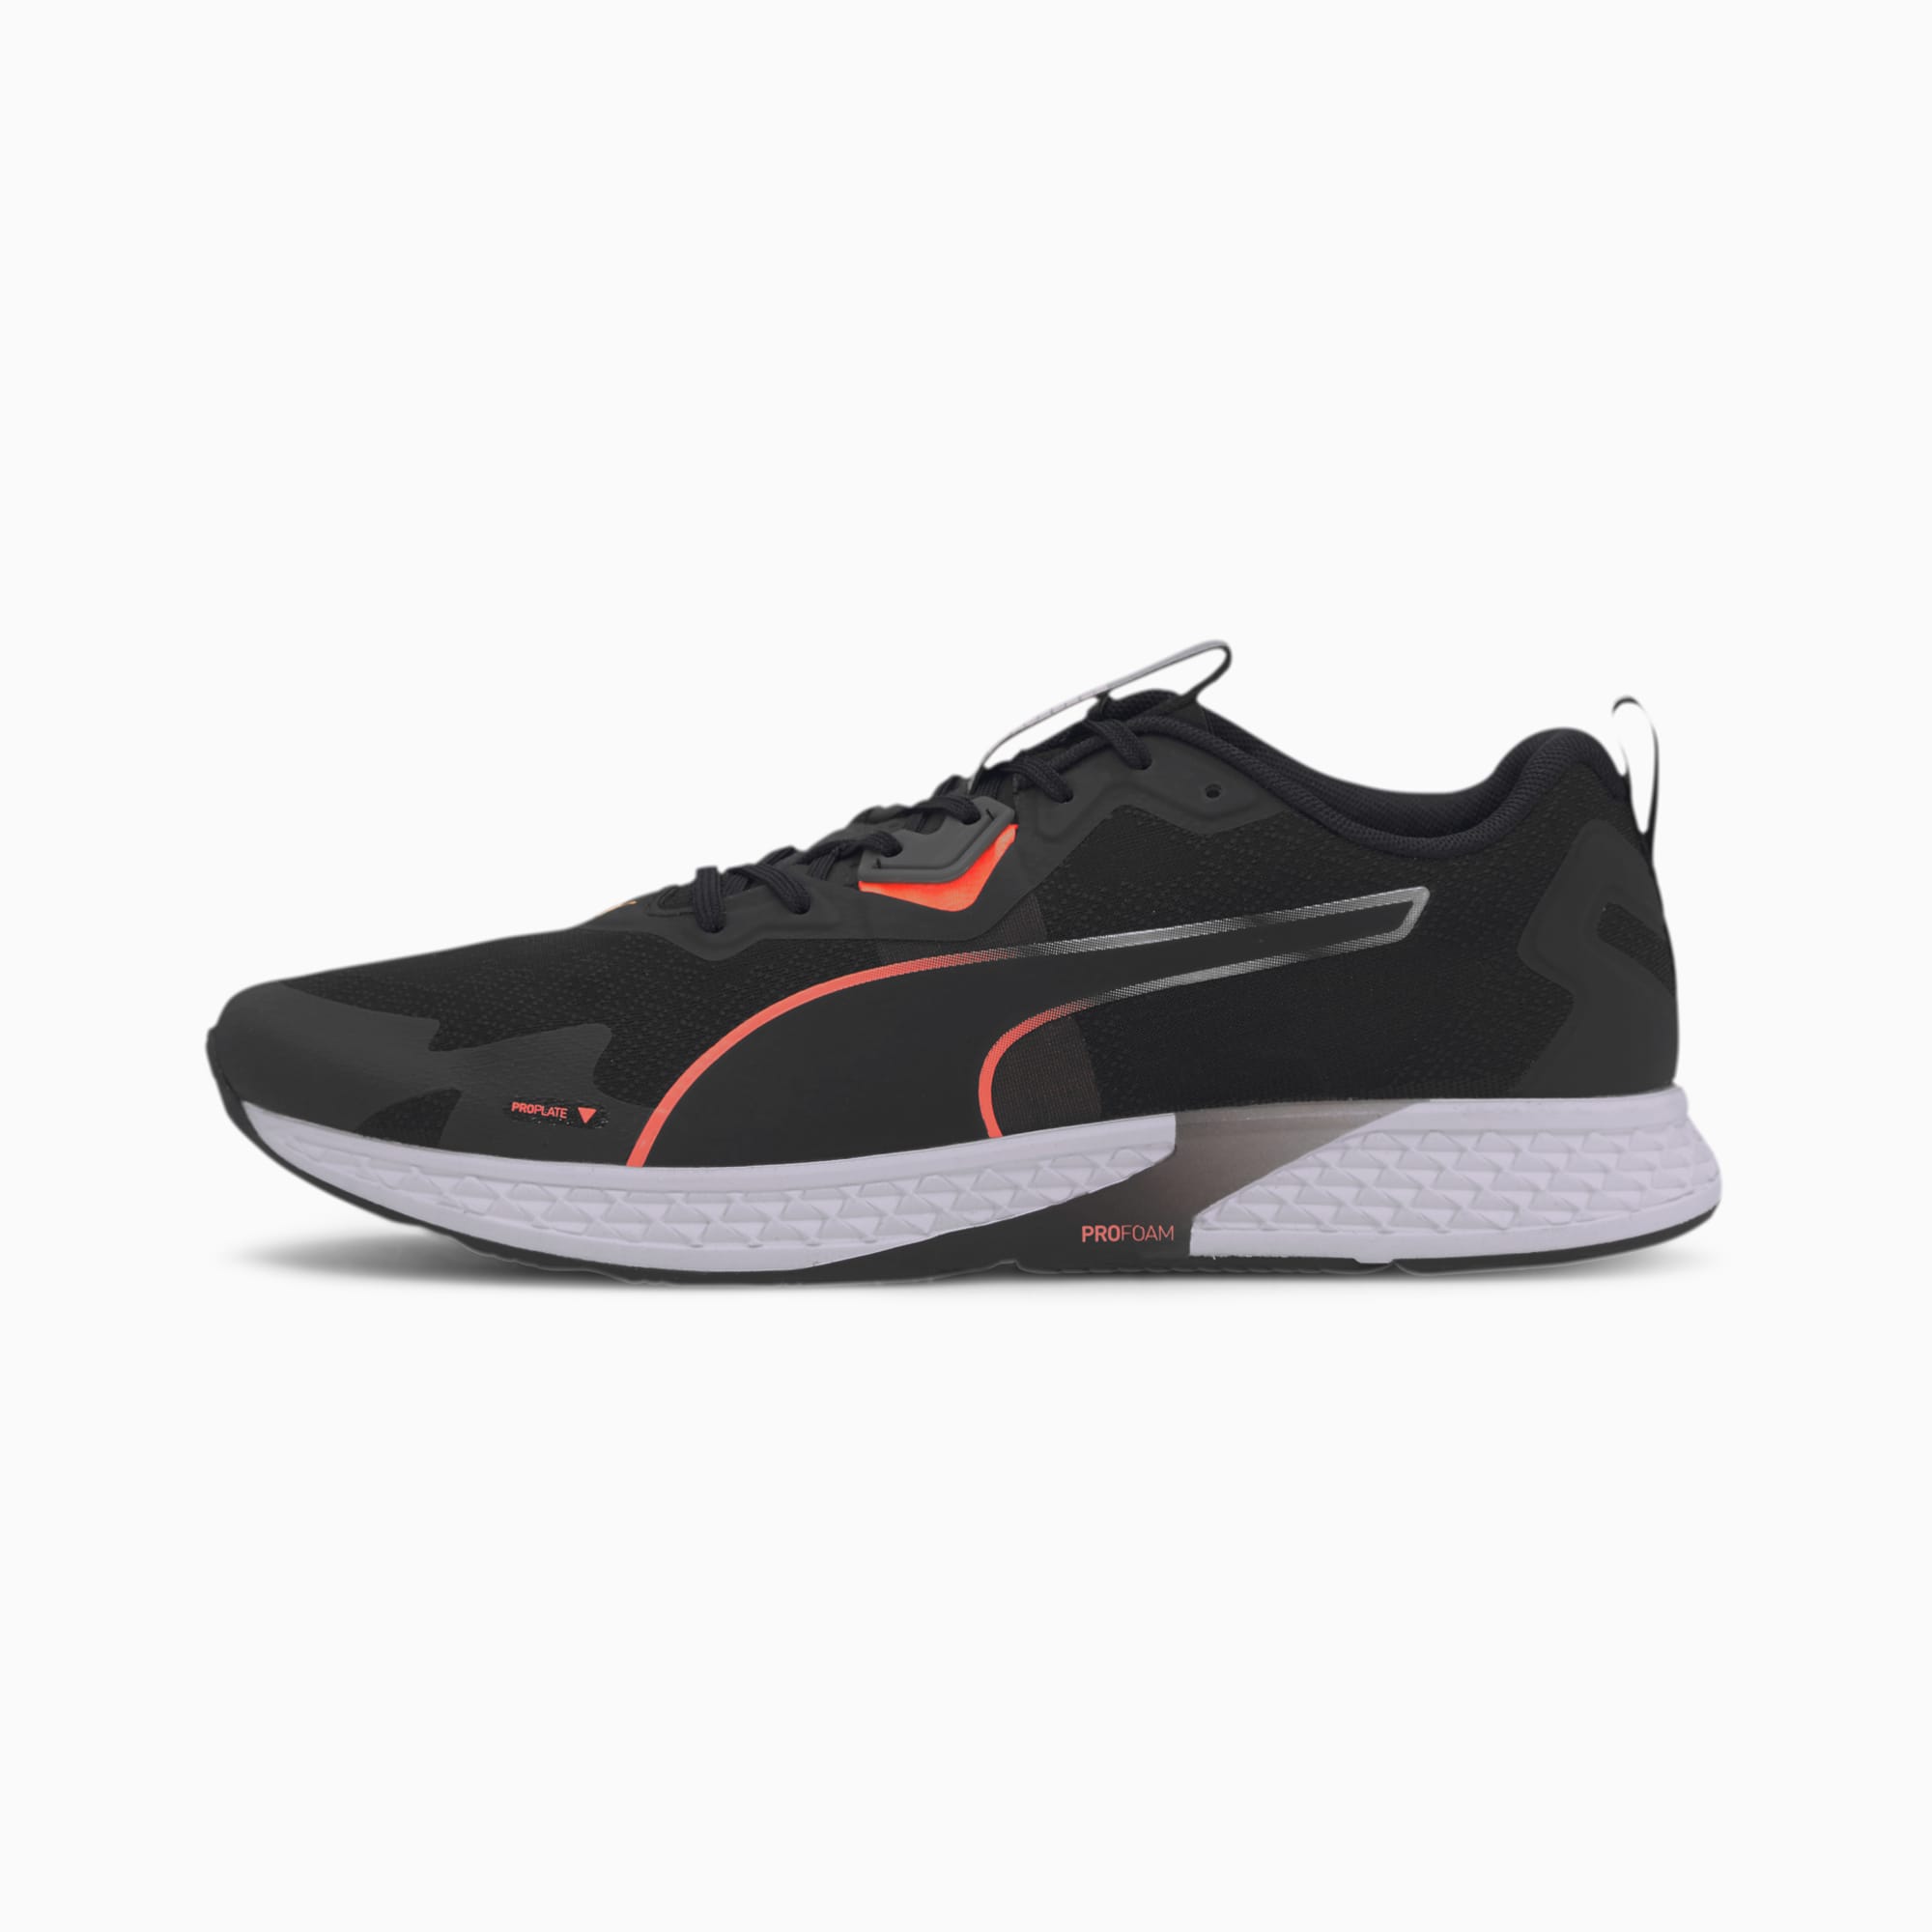 PUMA Chaussures de course SPEED 500 2 homme, Noir/Rose, Taille 40.5, Chaussures